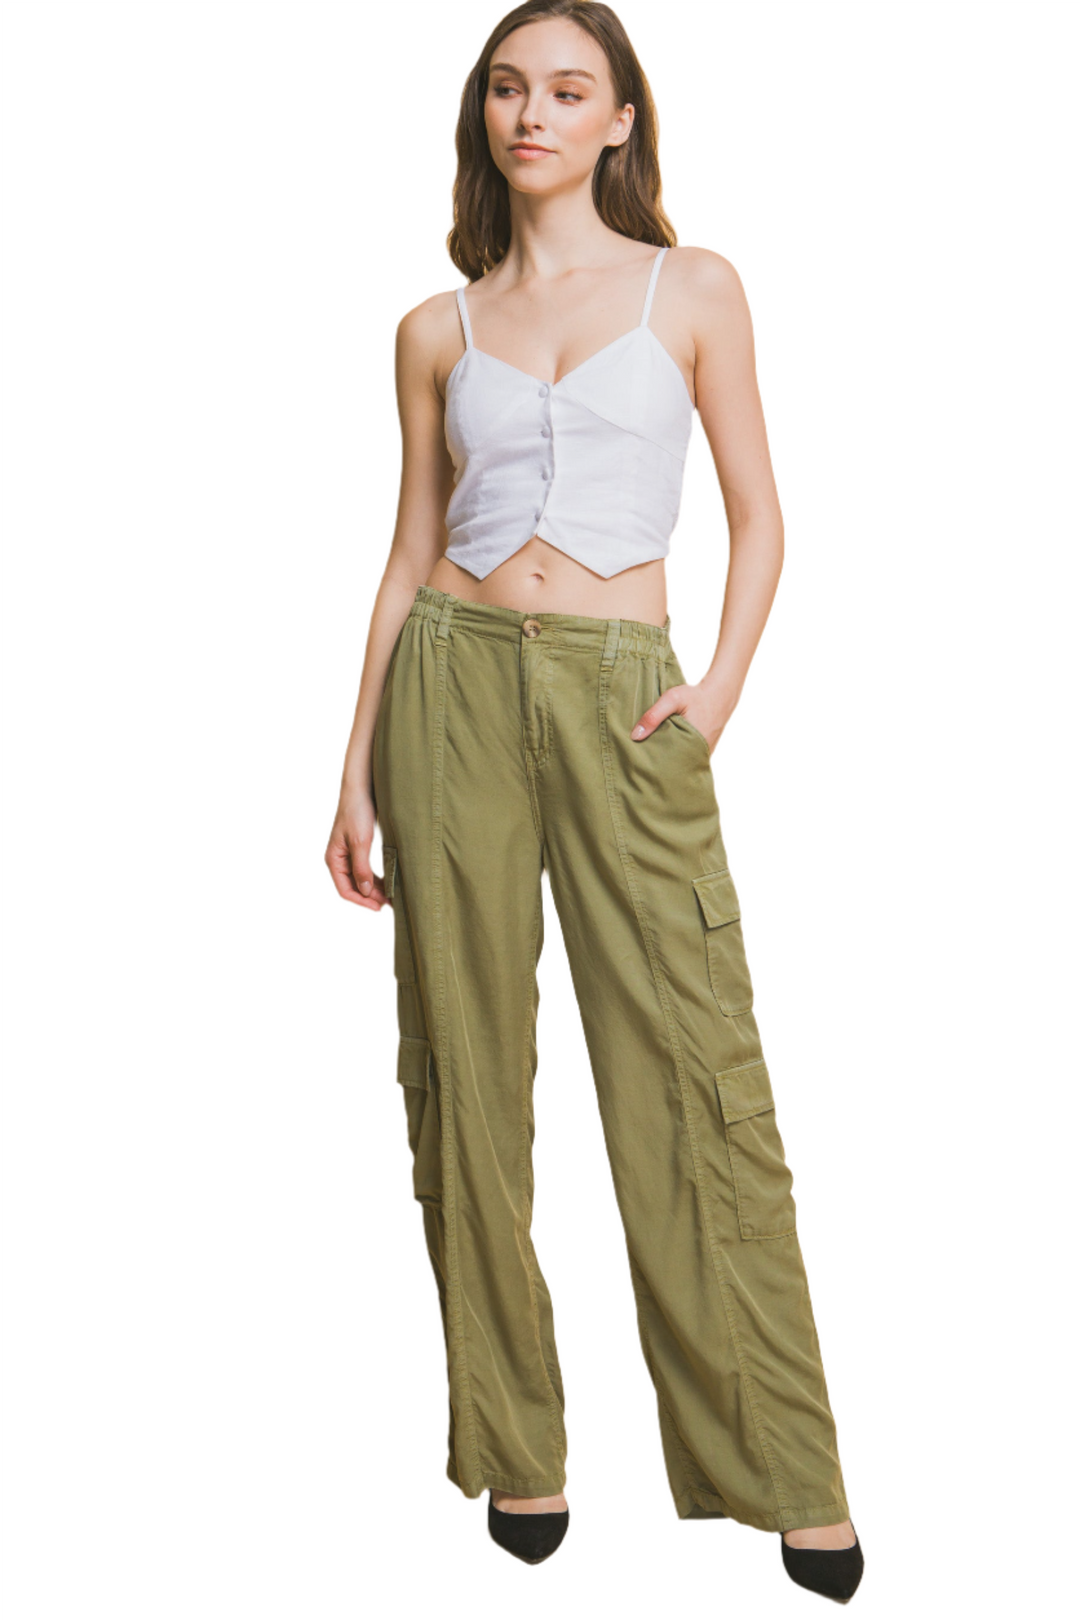 Full-Length Tencel Cargo Pants in Light Olive with Practical Cargo Pockets